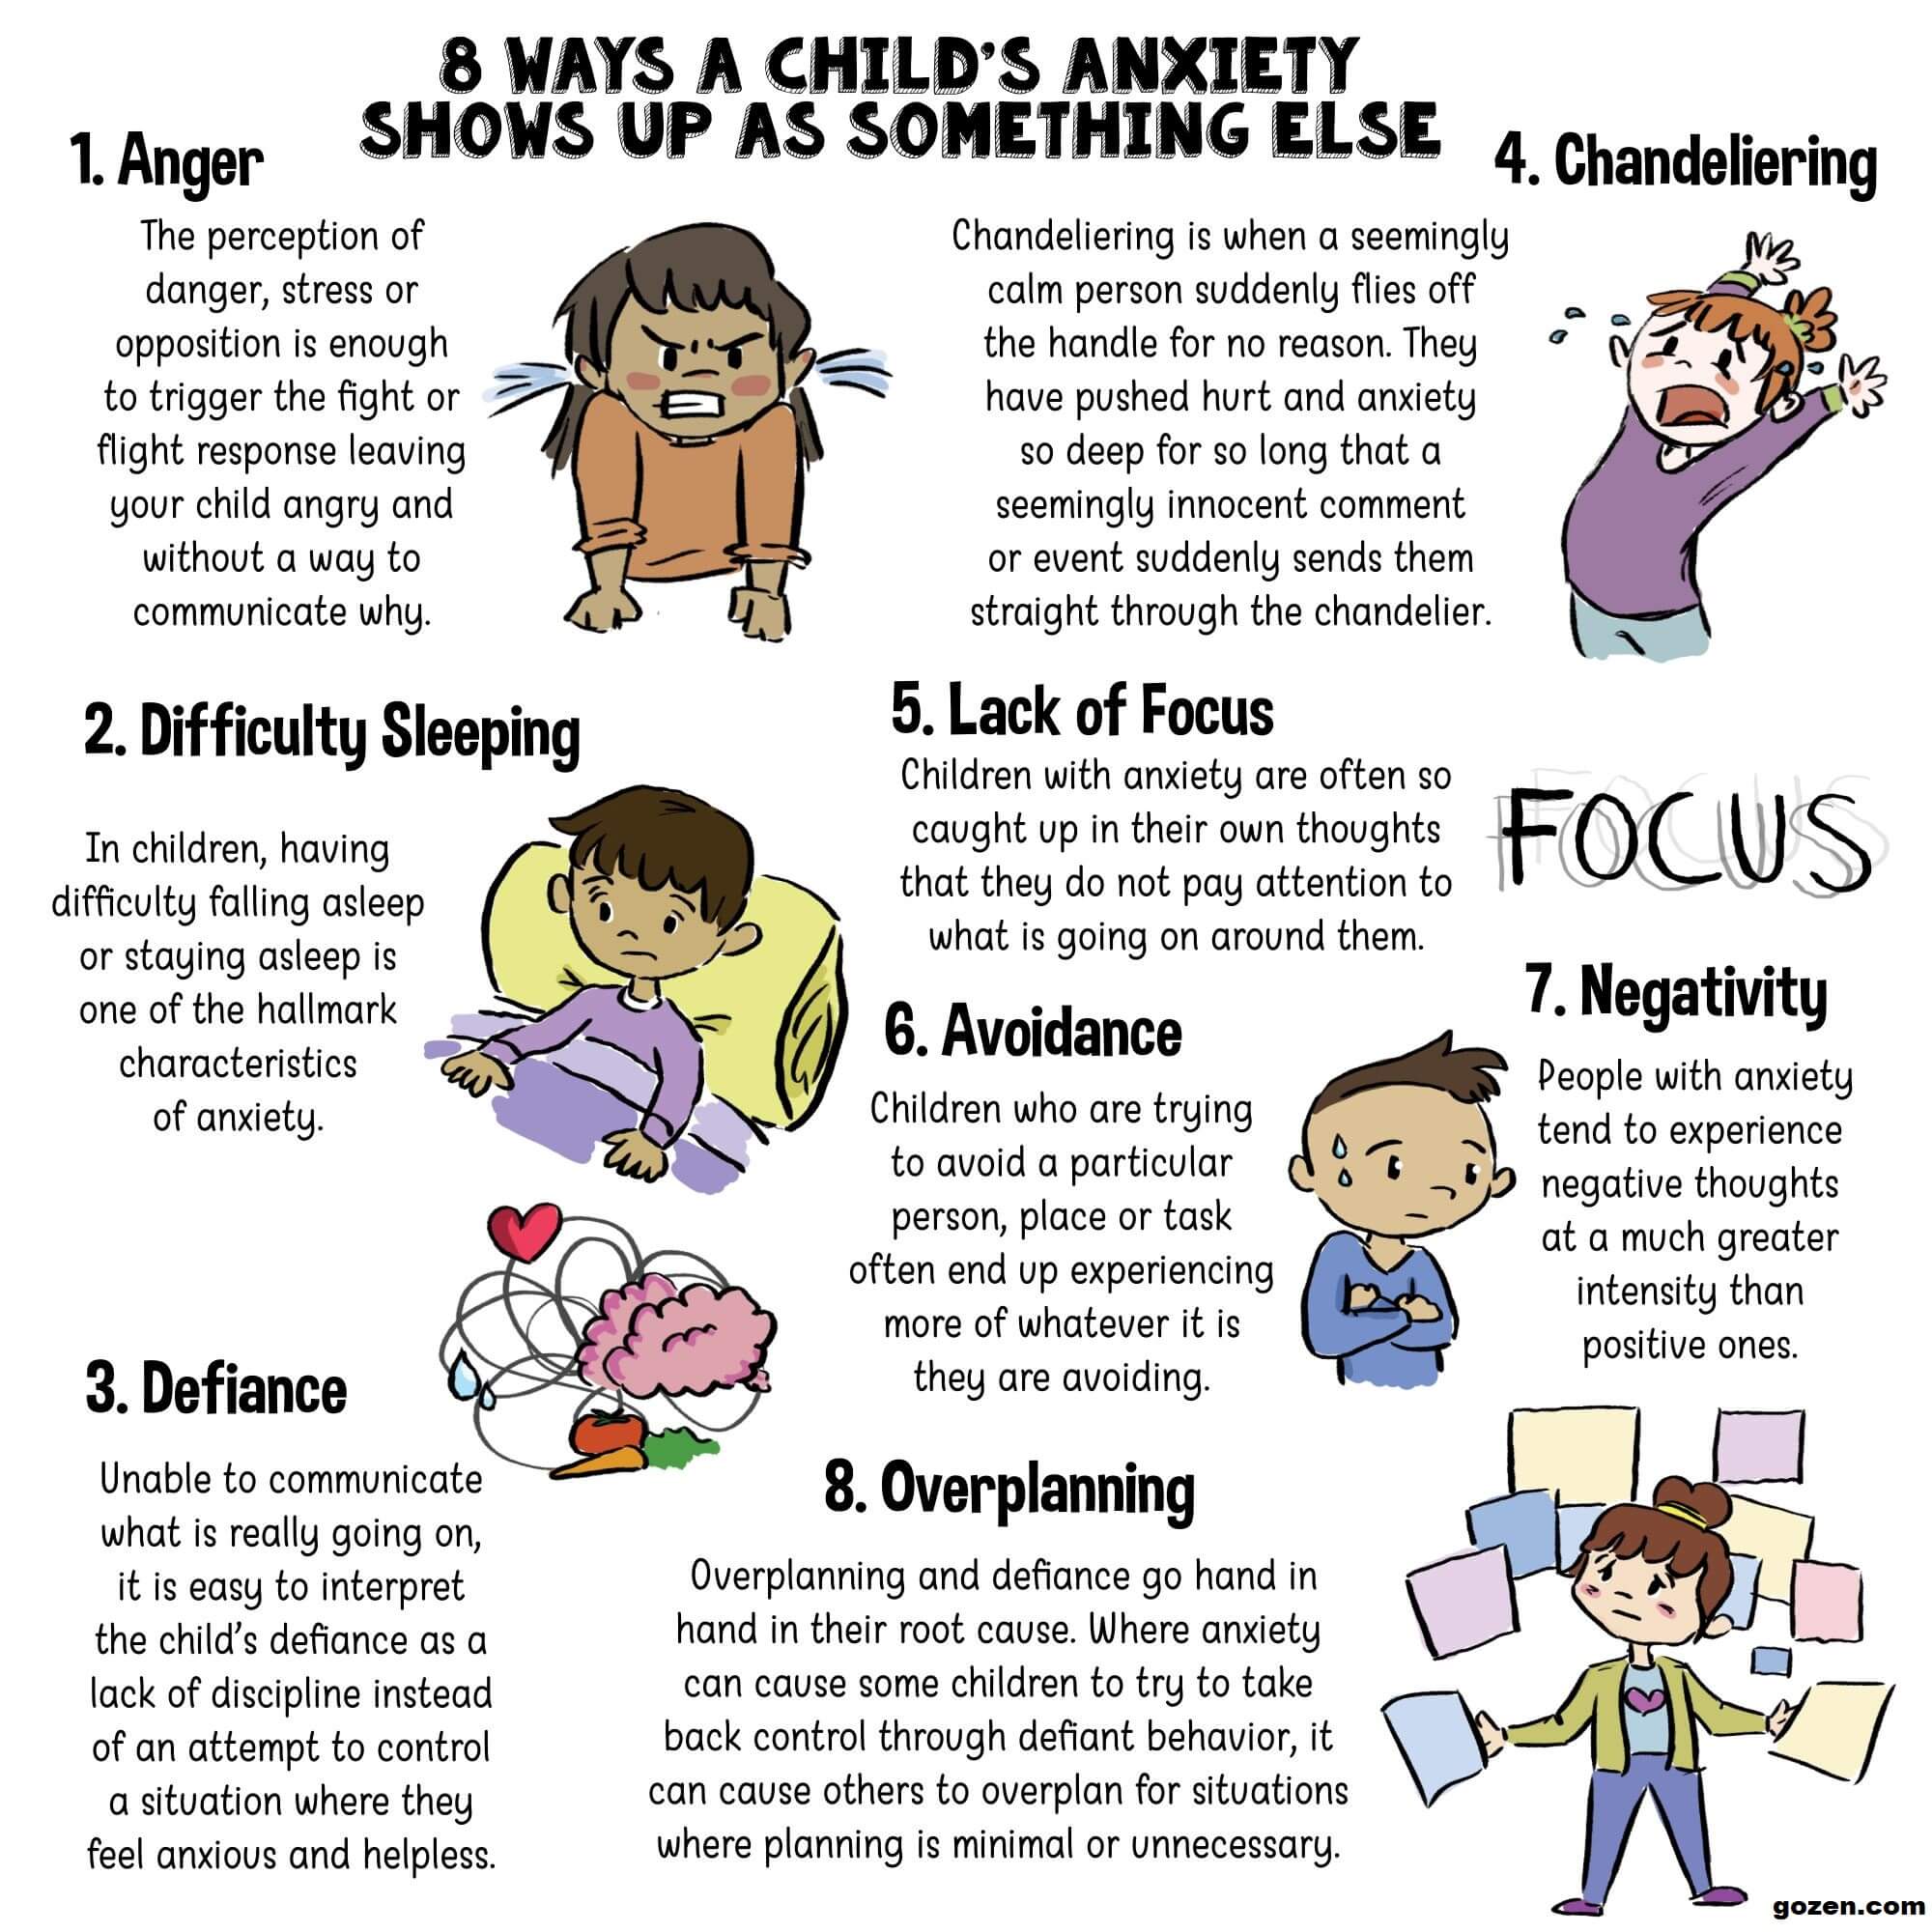 8 signs of anxiety in children that show up as something else